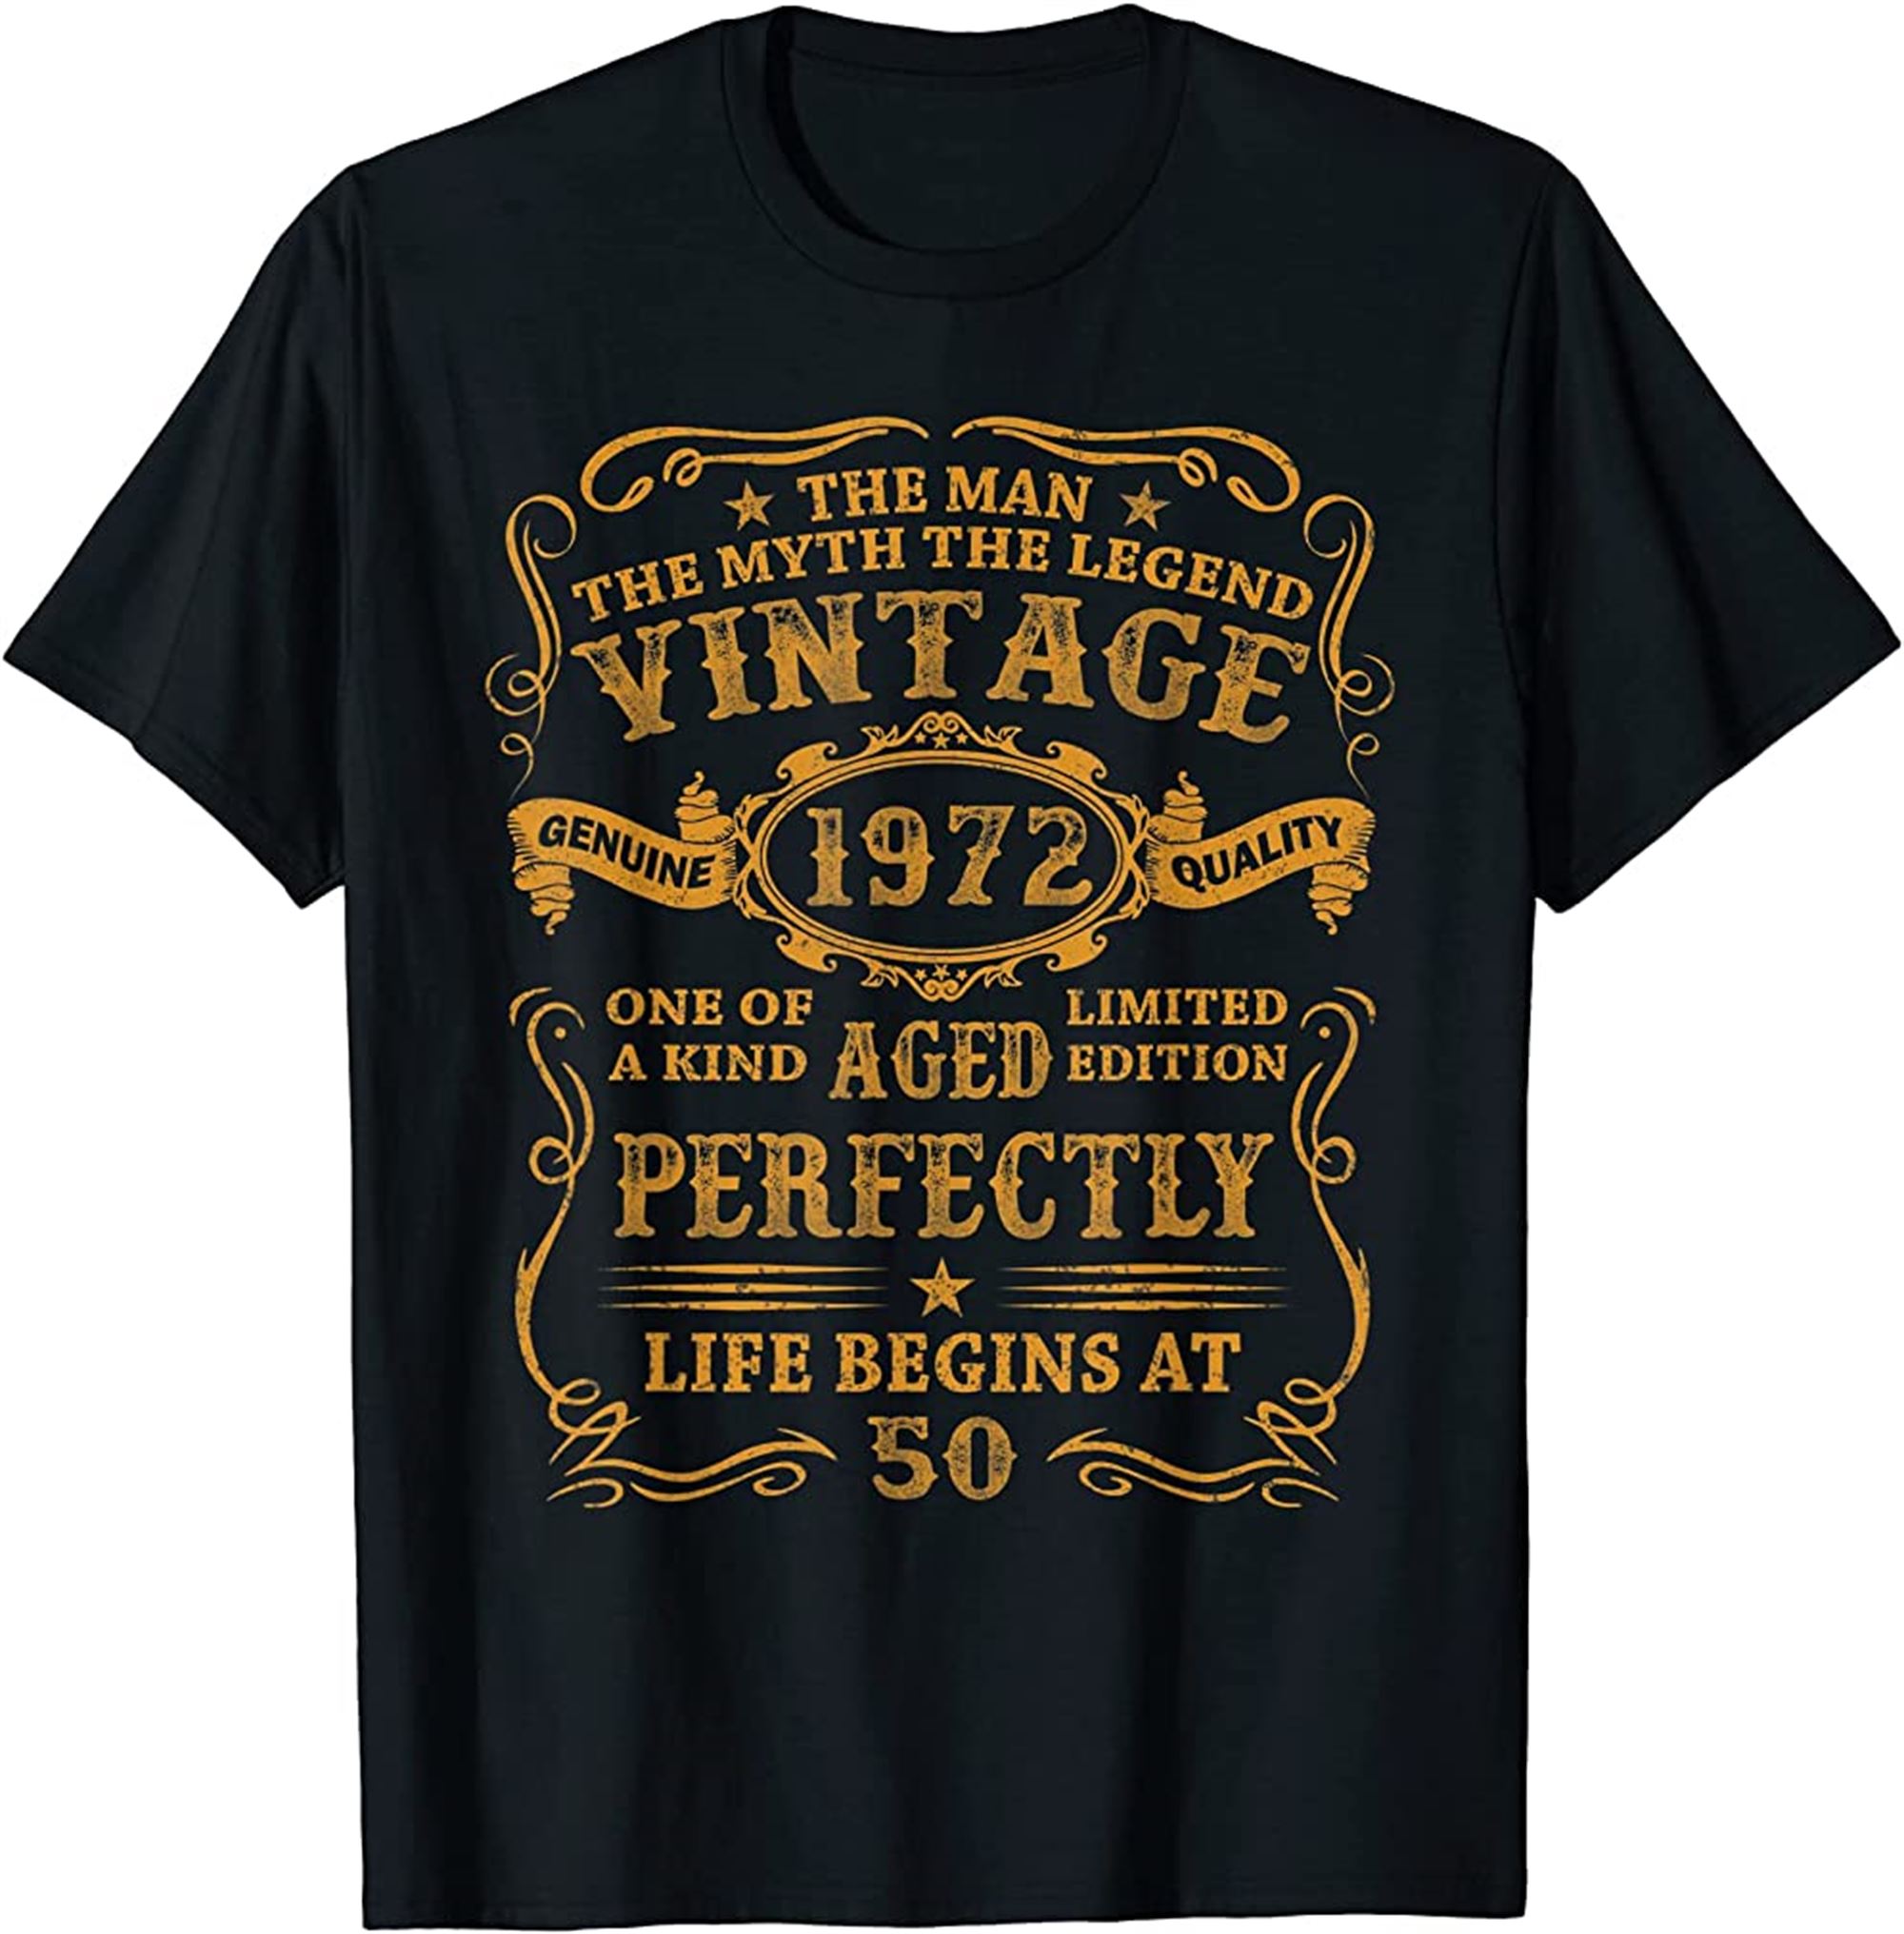 Mens Vintage 1972 Man Myth Legend 50 Year Old Gifts 50th Birthday T-shirt Full Size Up To 5xl